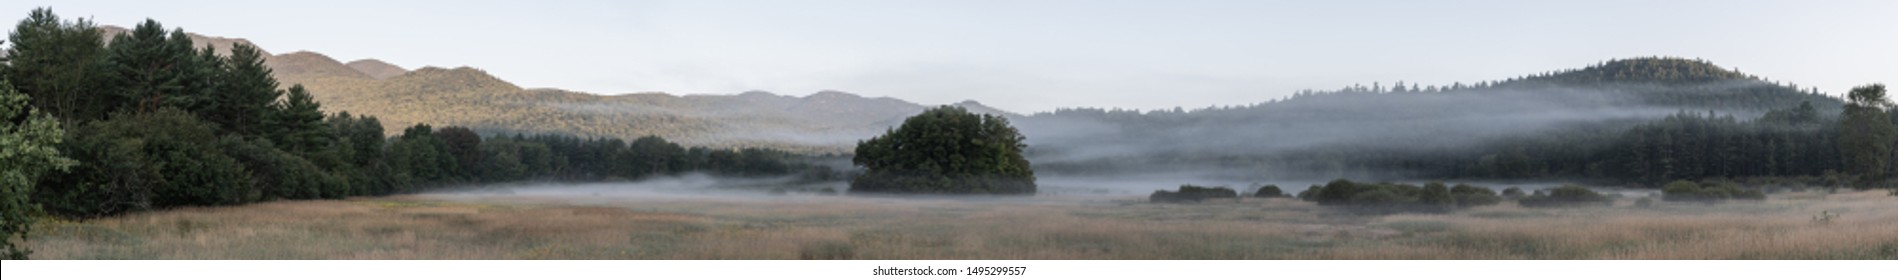 Panorama of early morning mist in the Adirondacks National Park. Field with mountains in the background. Cold August sunrise. Shot in the countryside of Keene (Lake Placid), NY, USA.